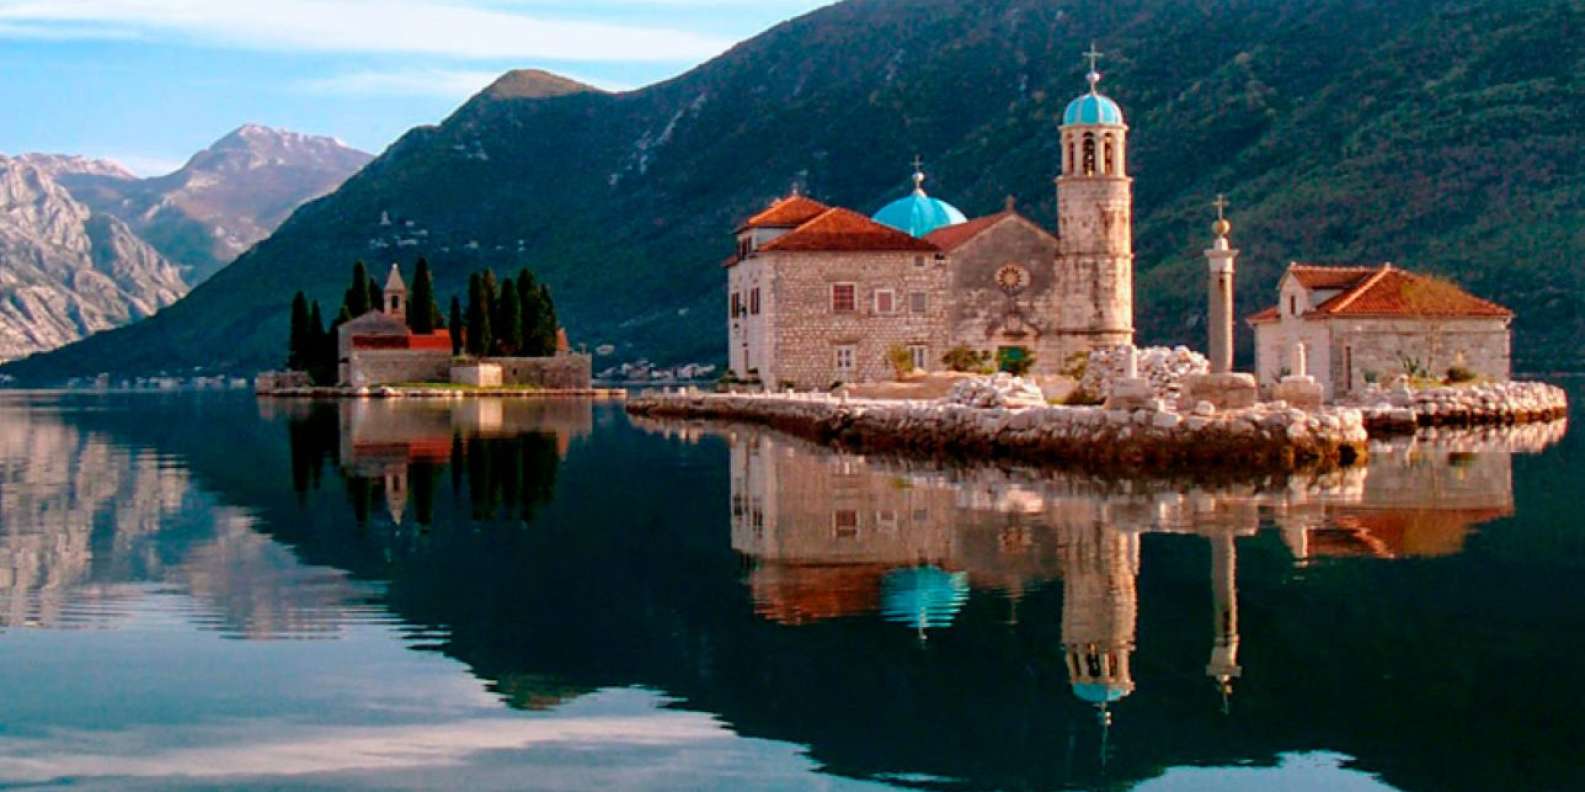 What to do in Perast